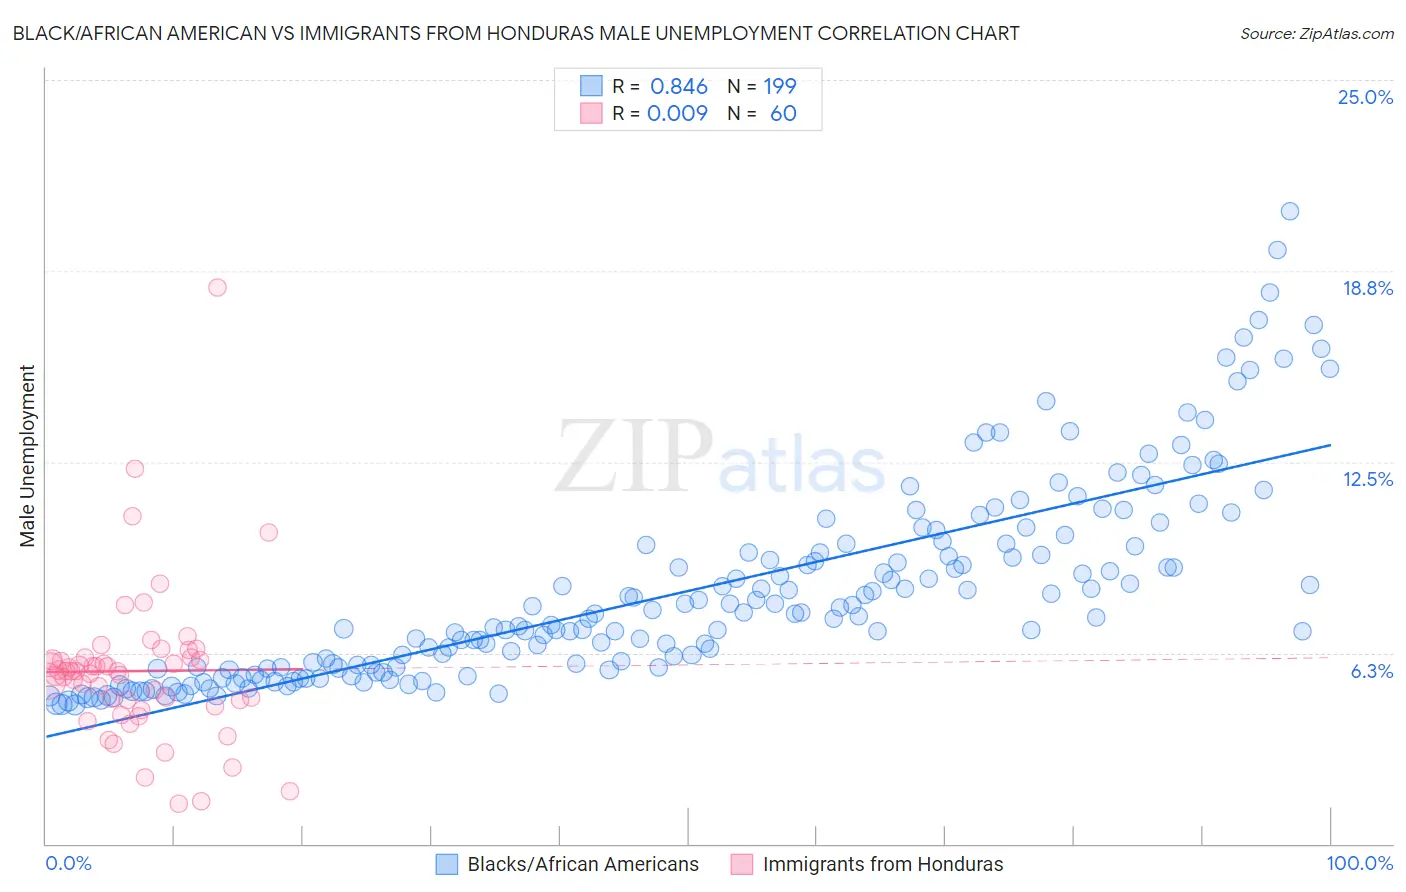 Black/African American vs Immigrants from Honduras Male Unemployment